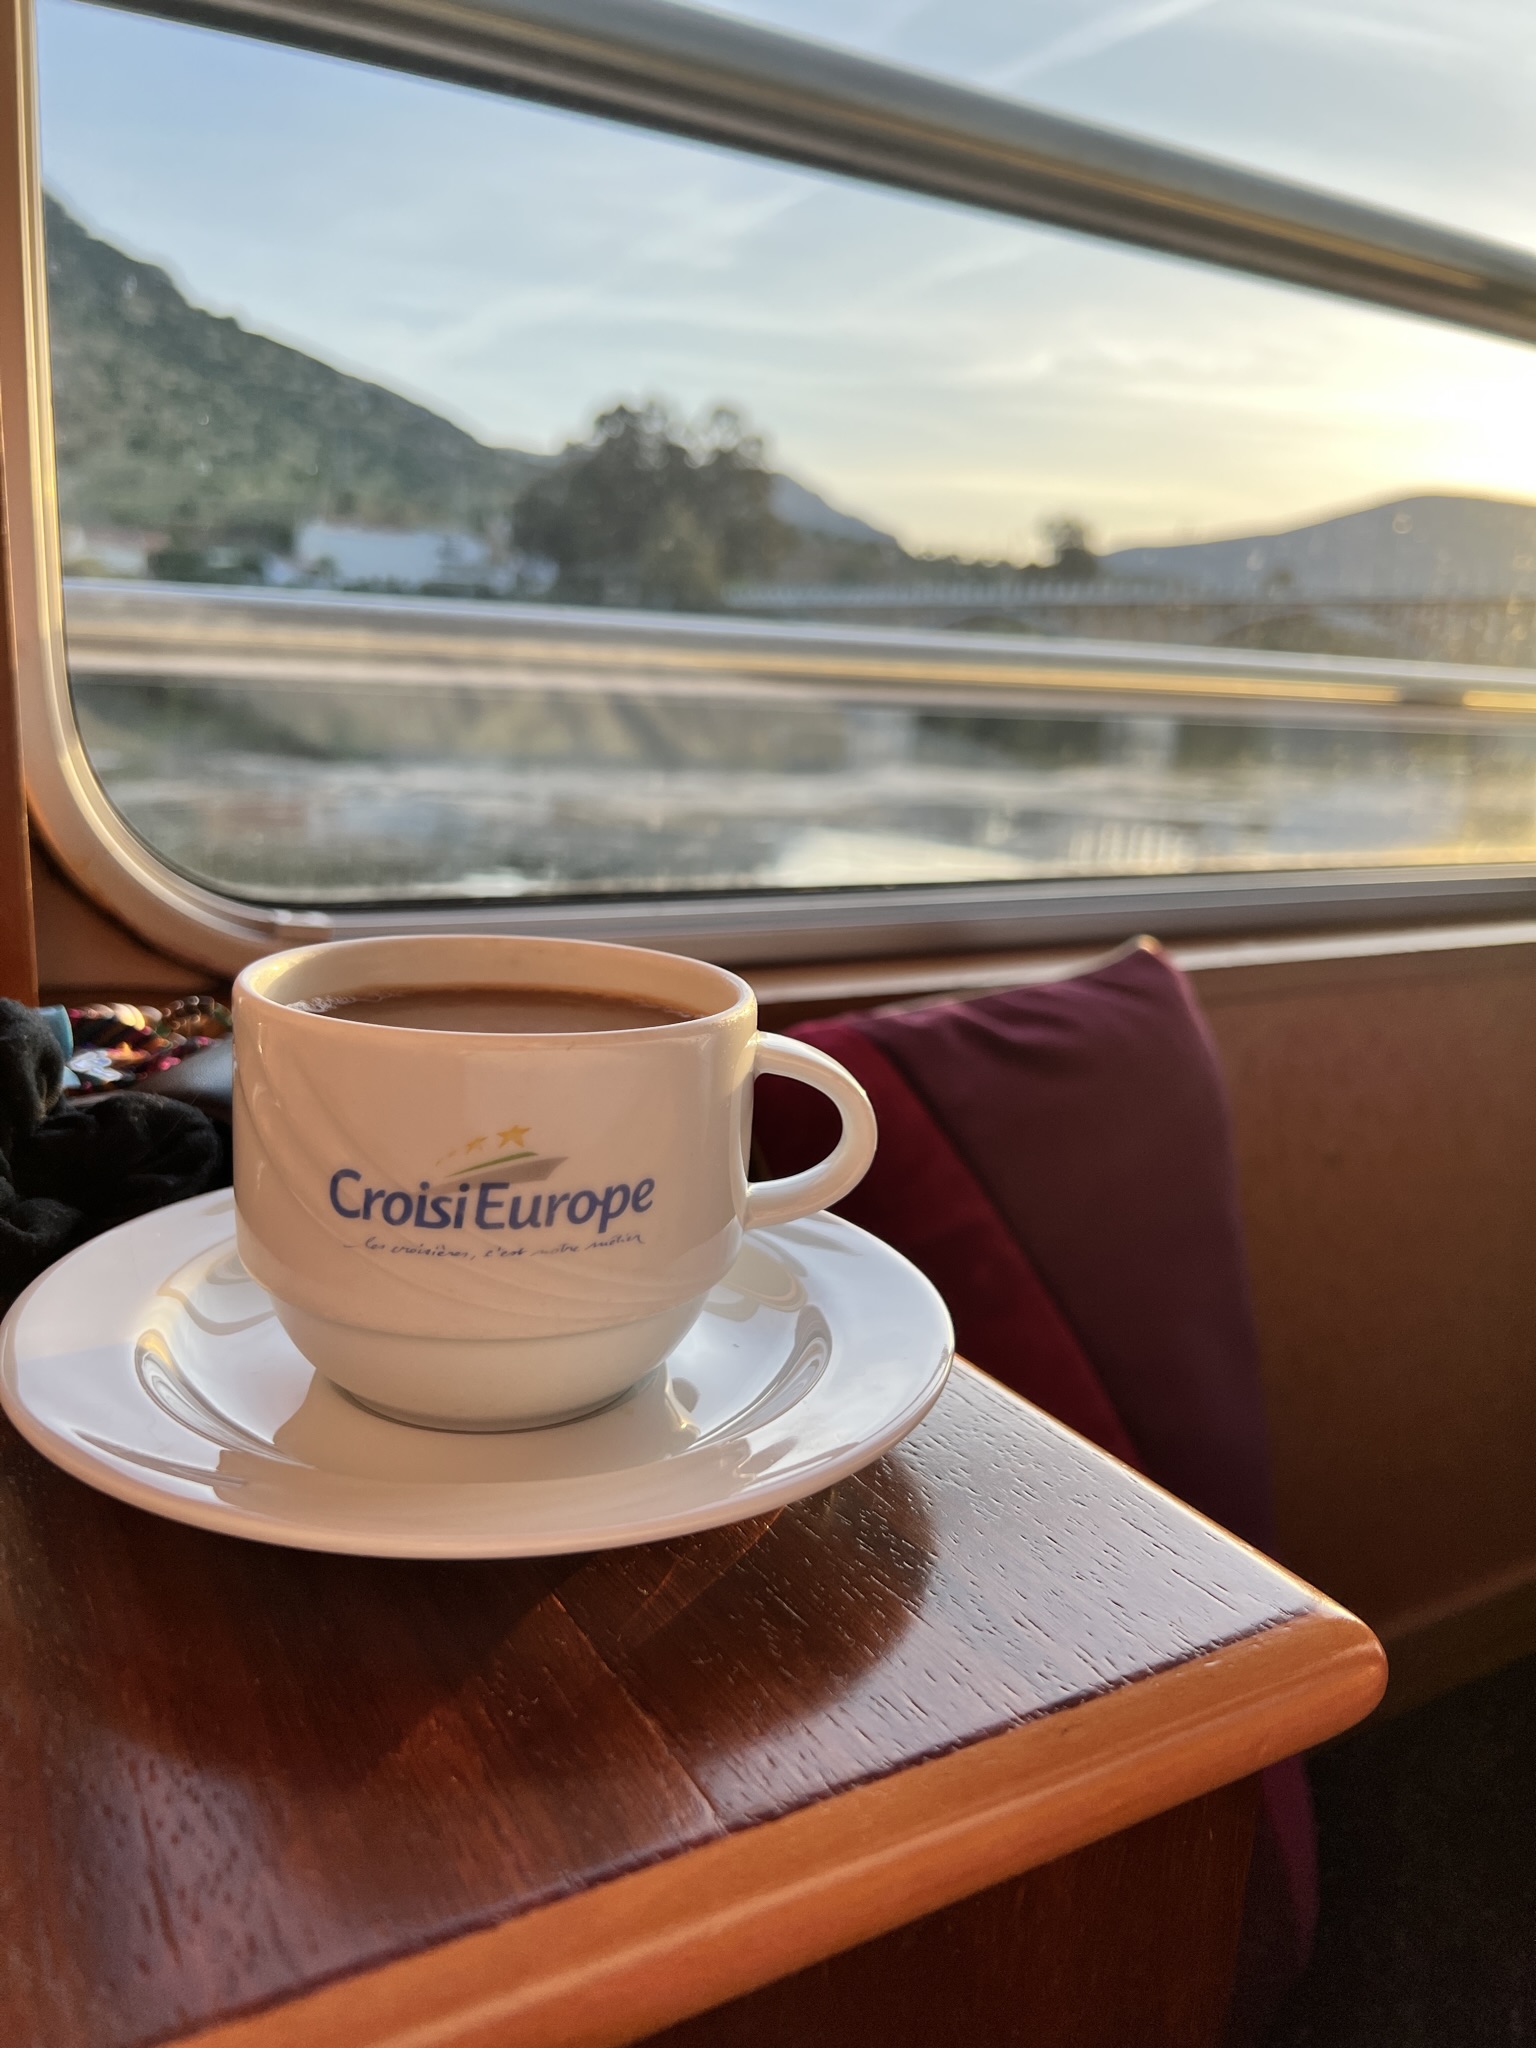 Cup of coffee in front of cabin view on river cruise.